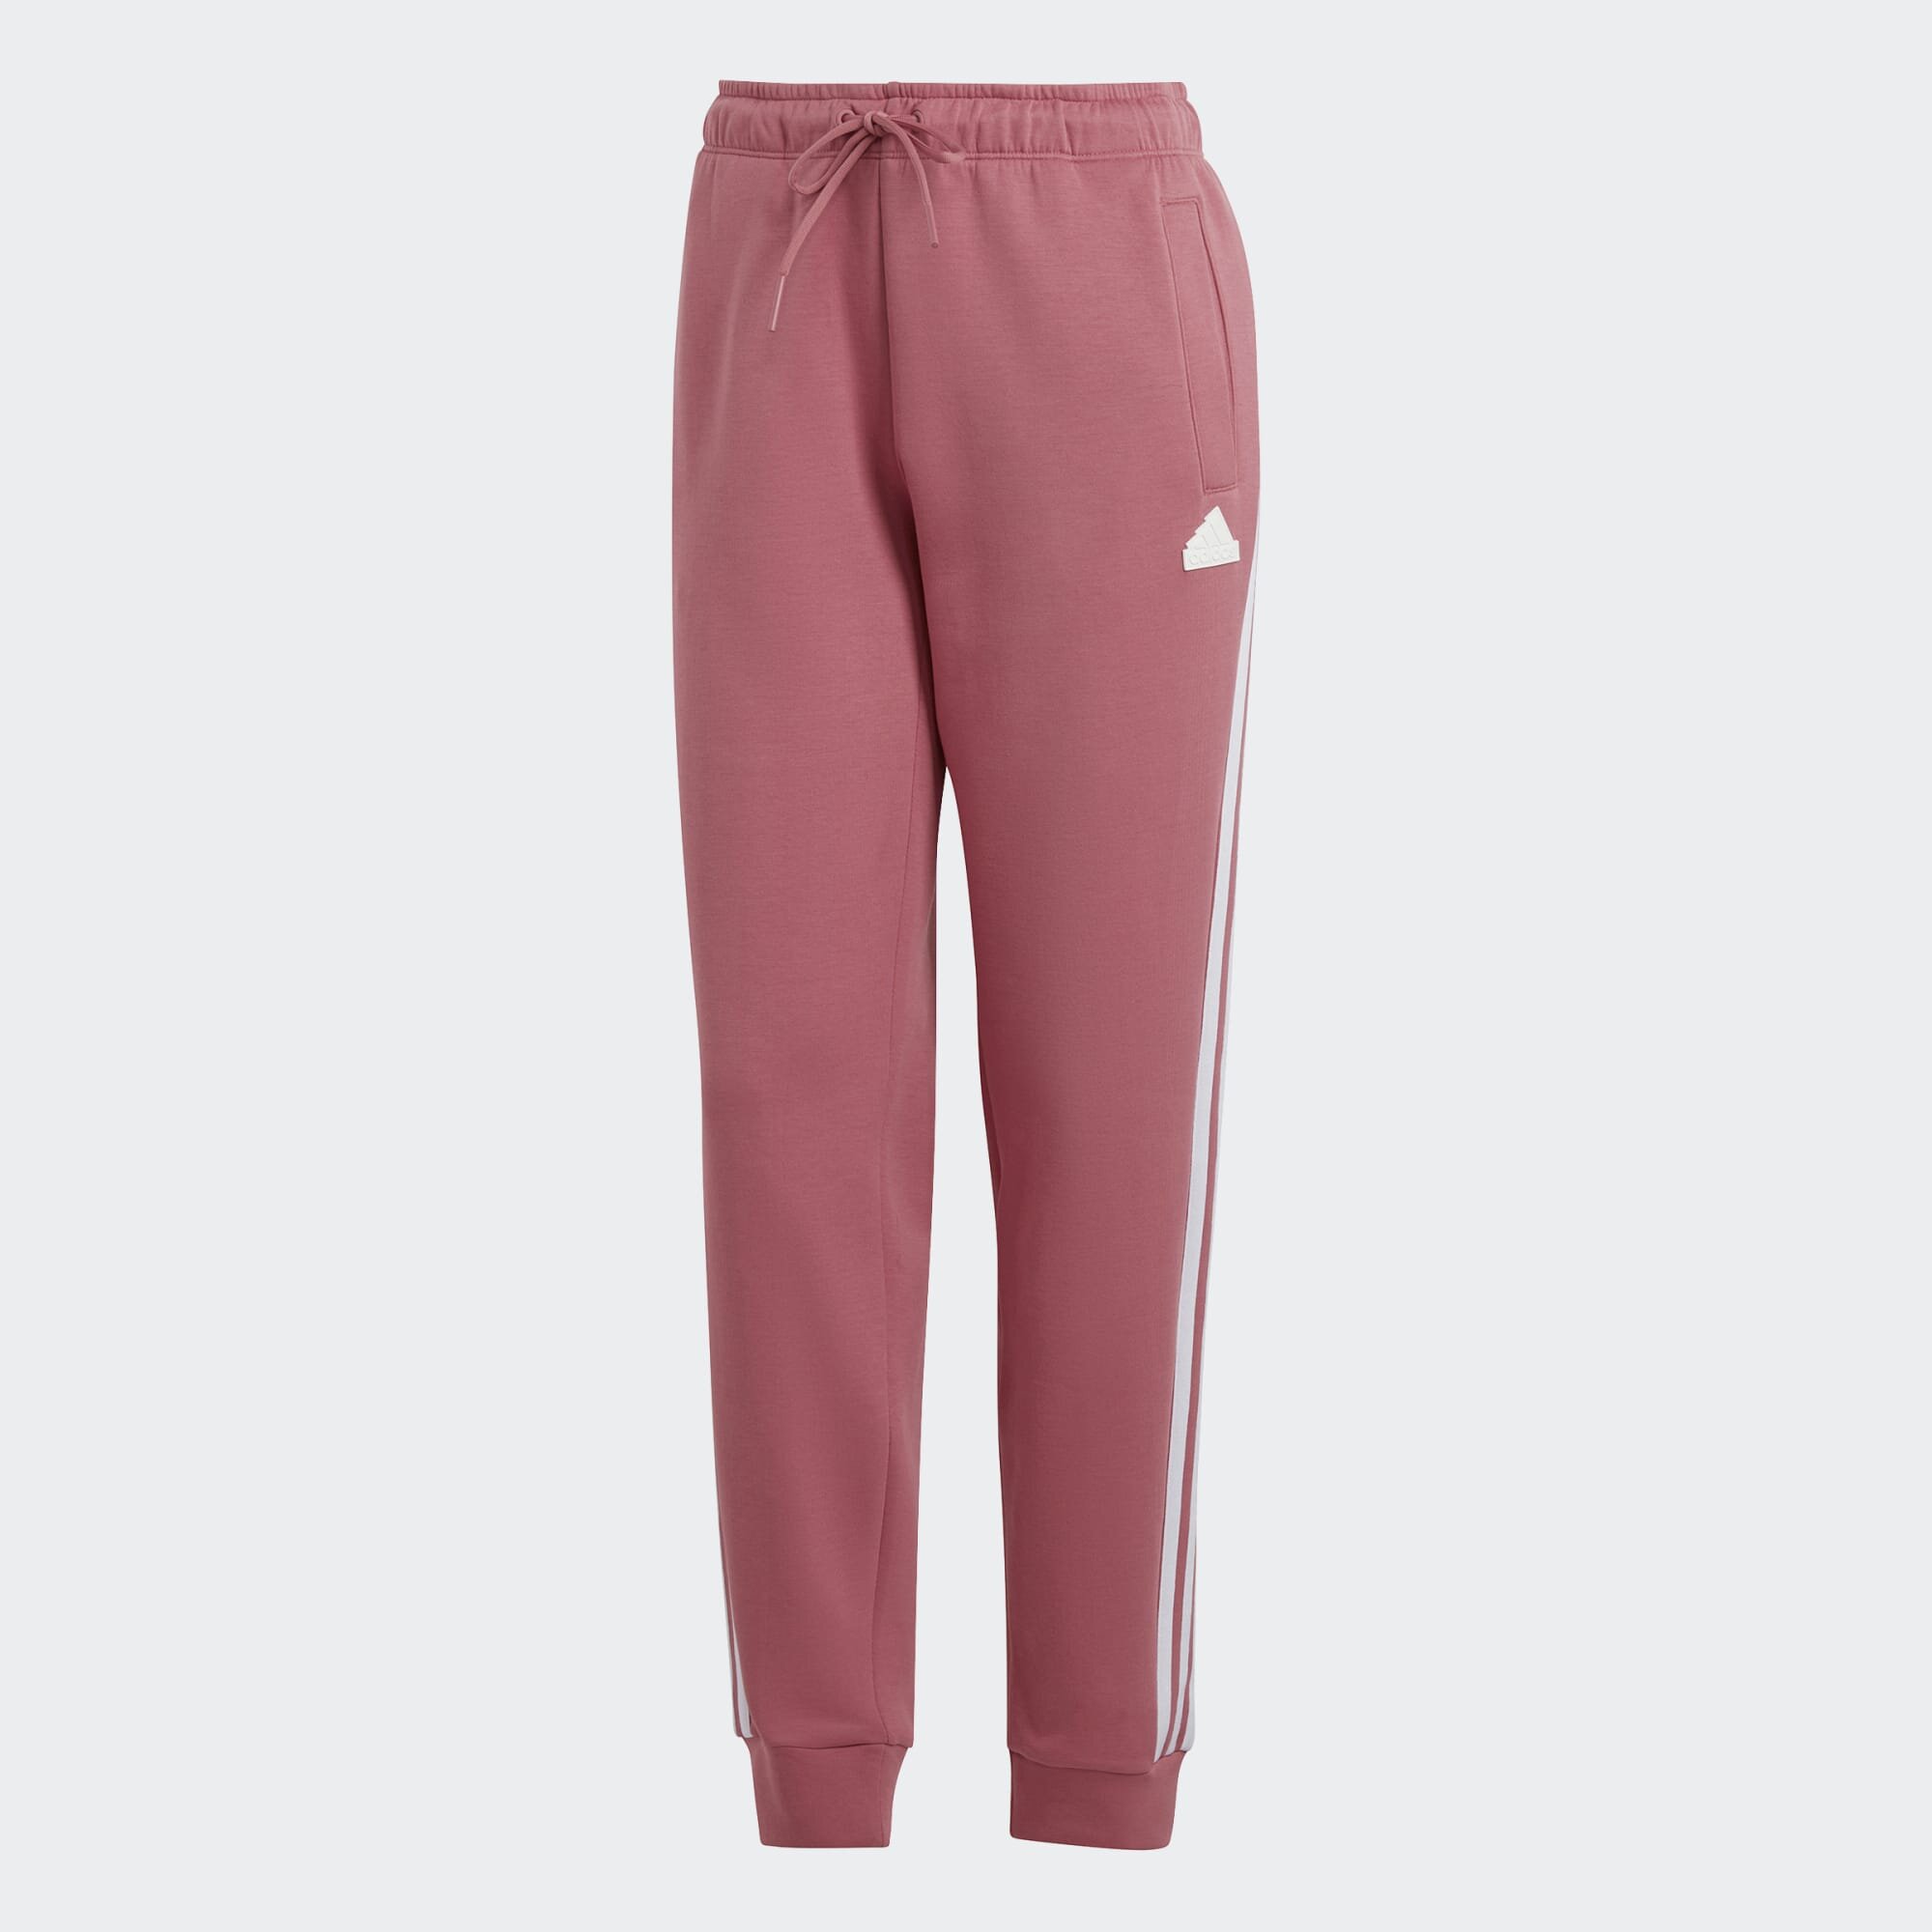 Adidas 3Stripe Regular Track Pants Womens - Buy Online - Ph: 1800-370-766 -  AfterPay & ZipPay Available!